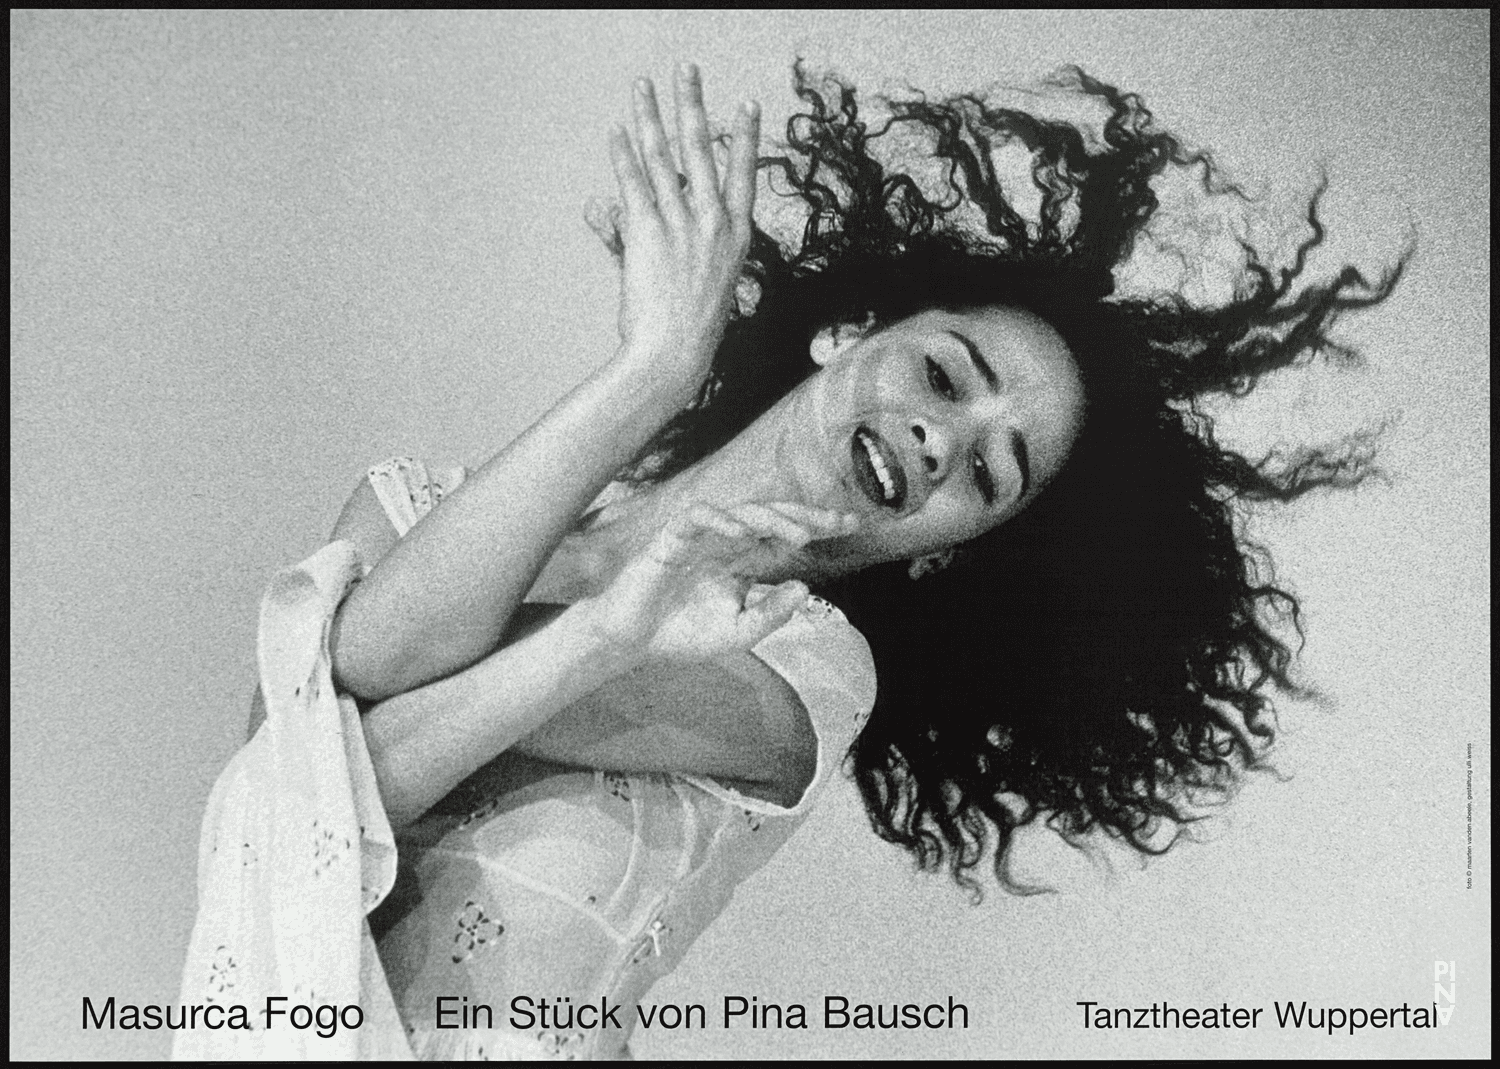 Poster for “Masurca Fogo” by Pina Bausch